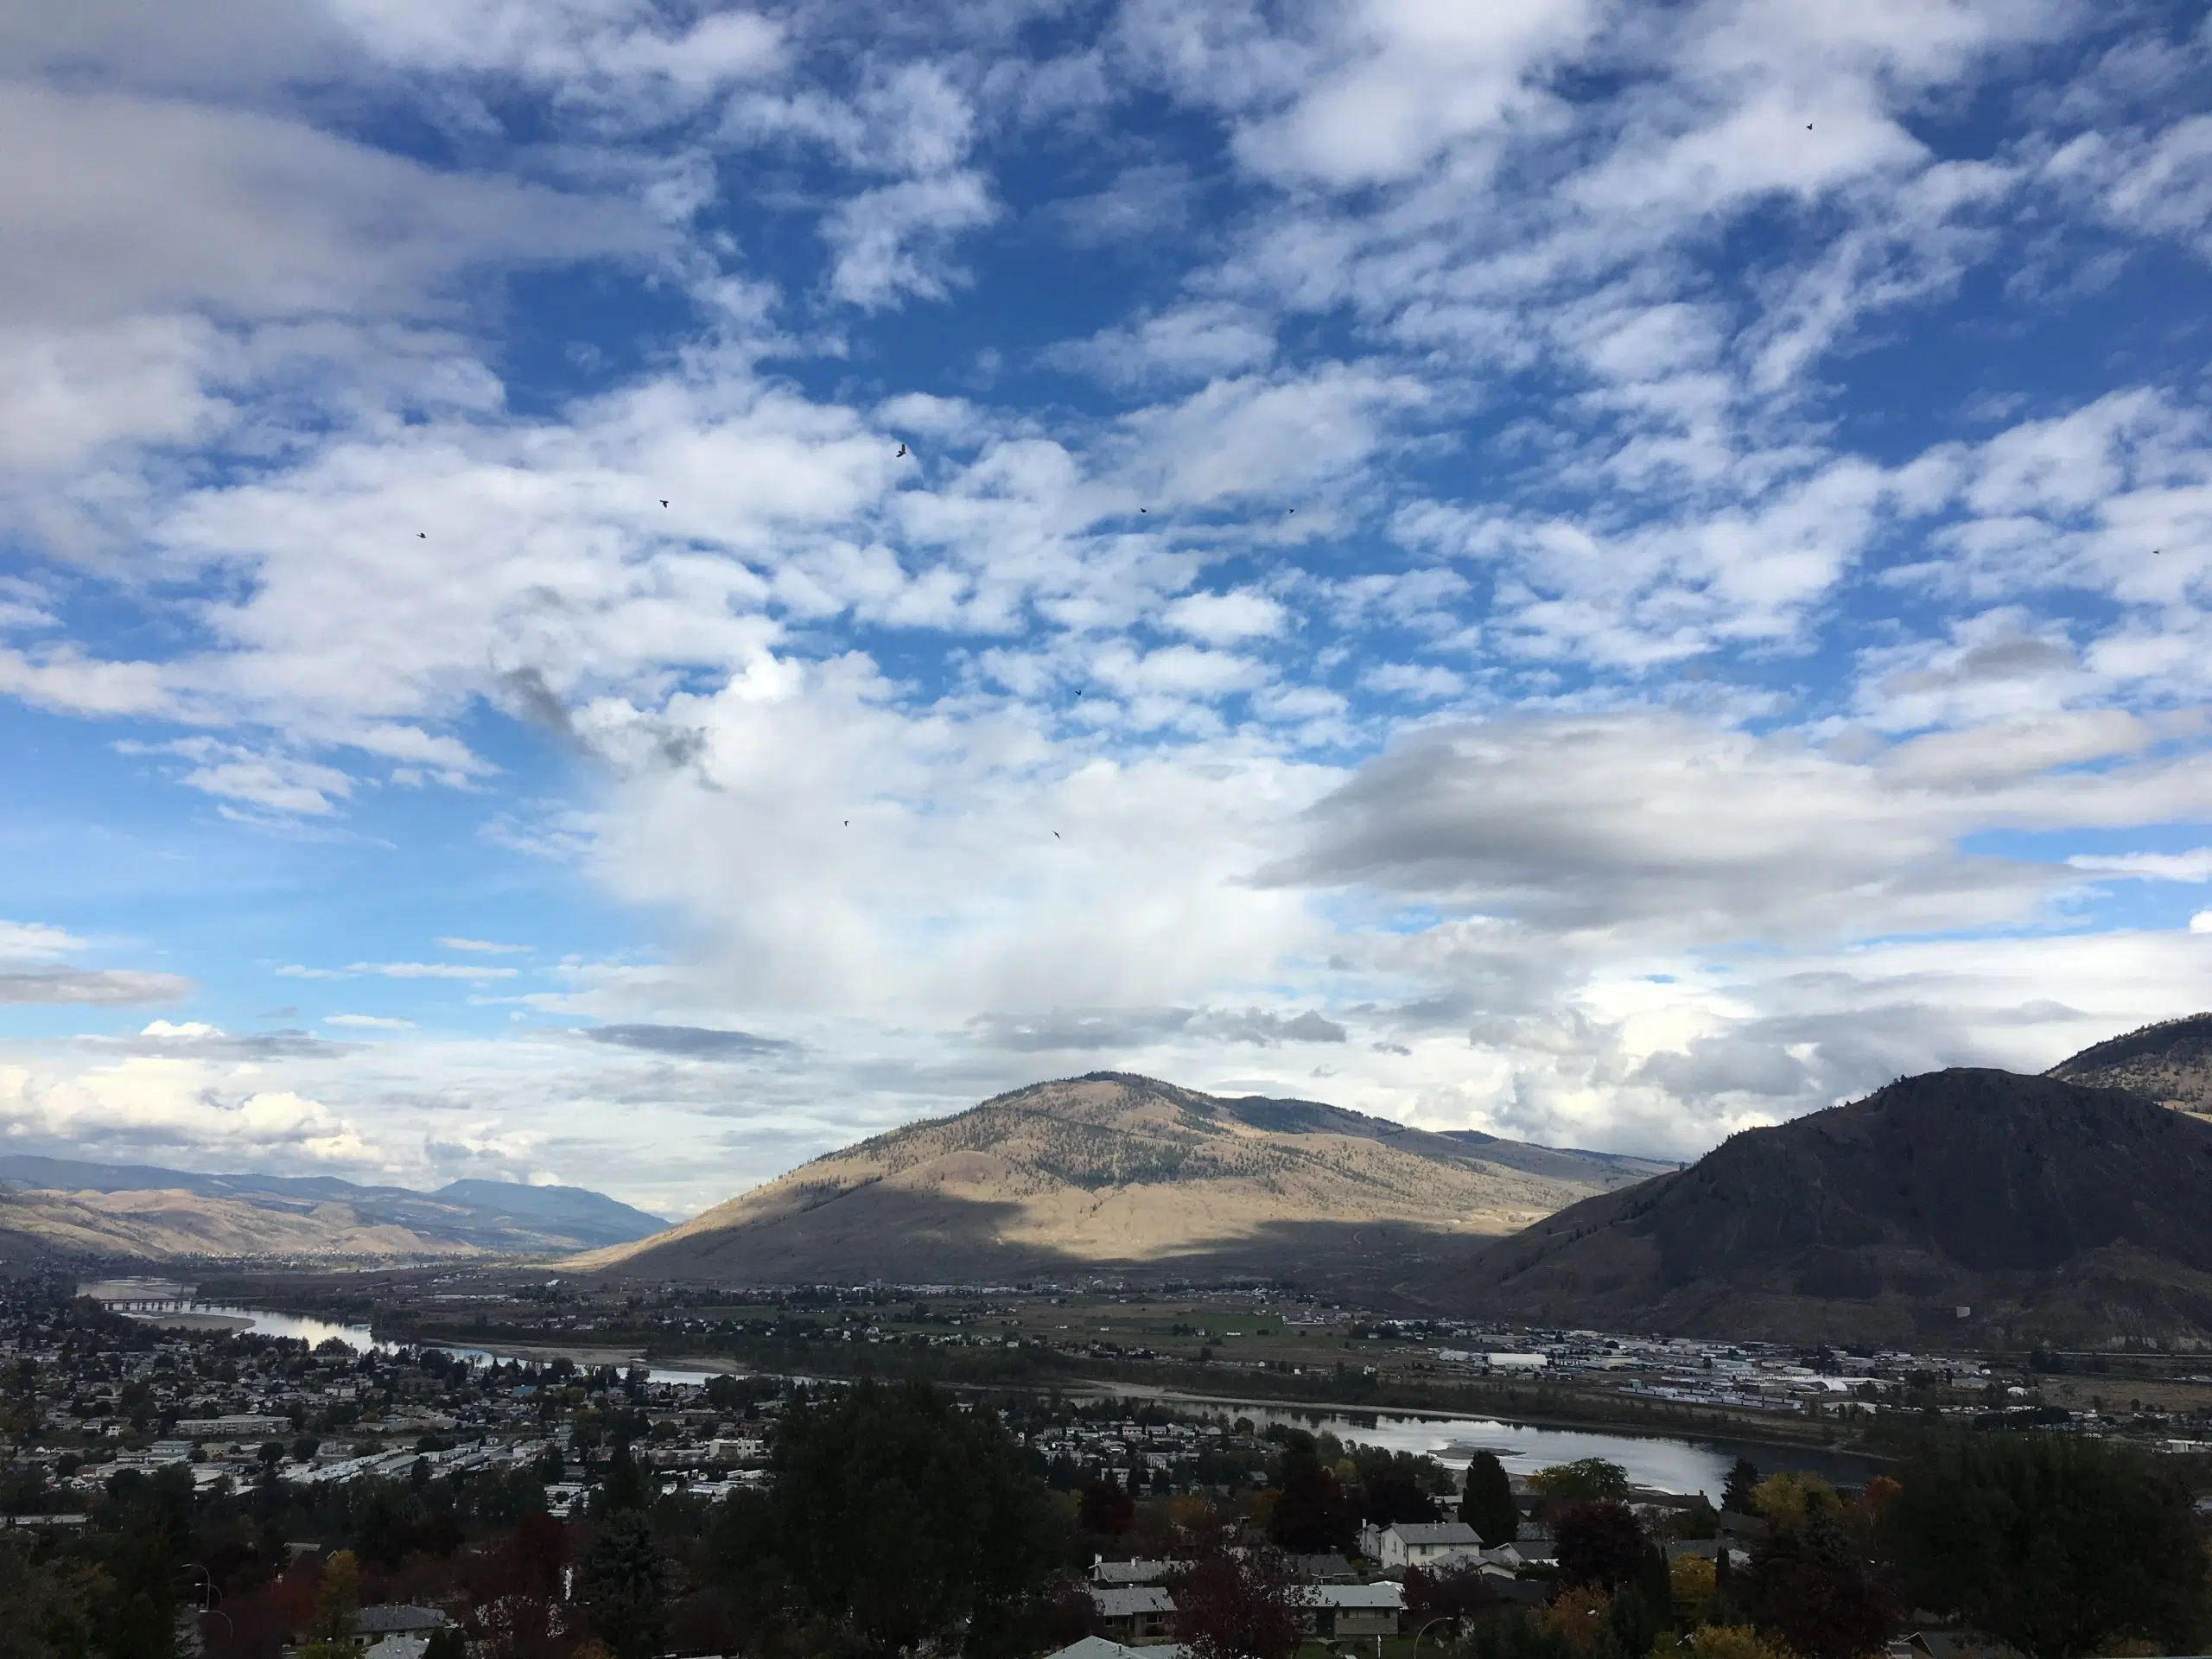 Latest population numbers show several important issues Kamloops will face